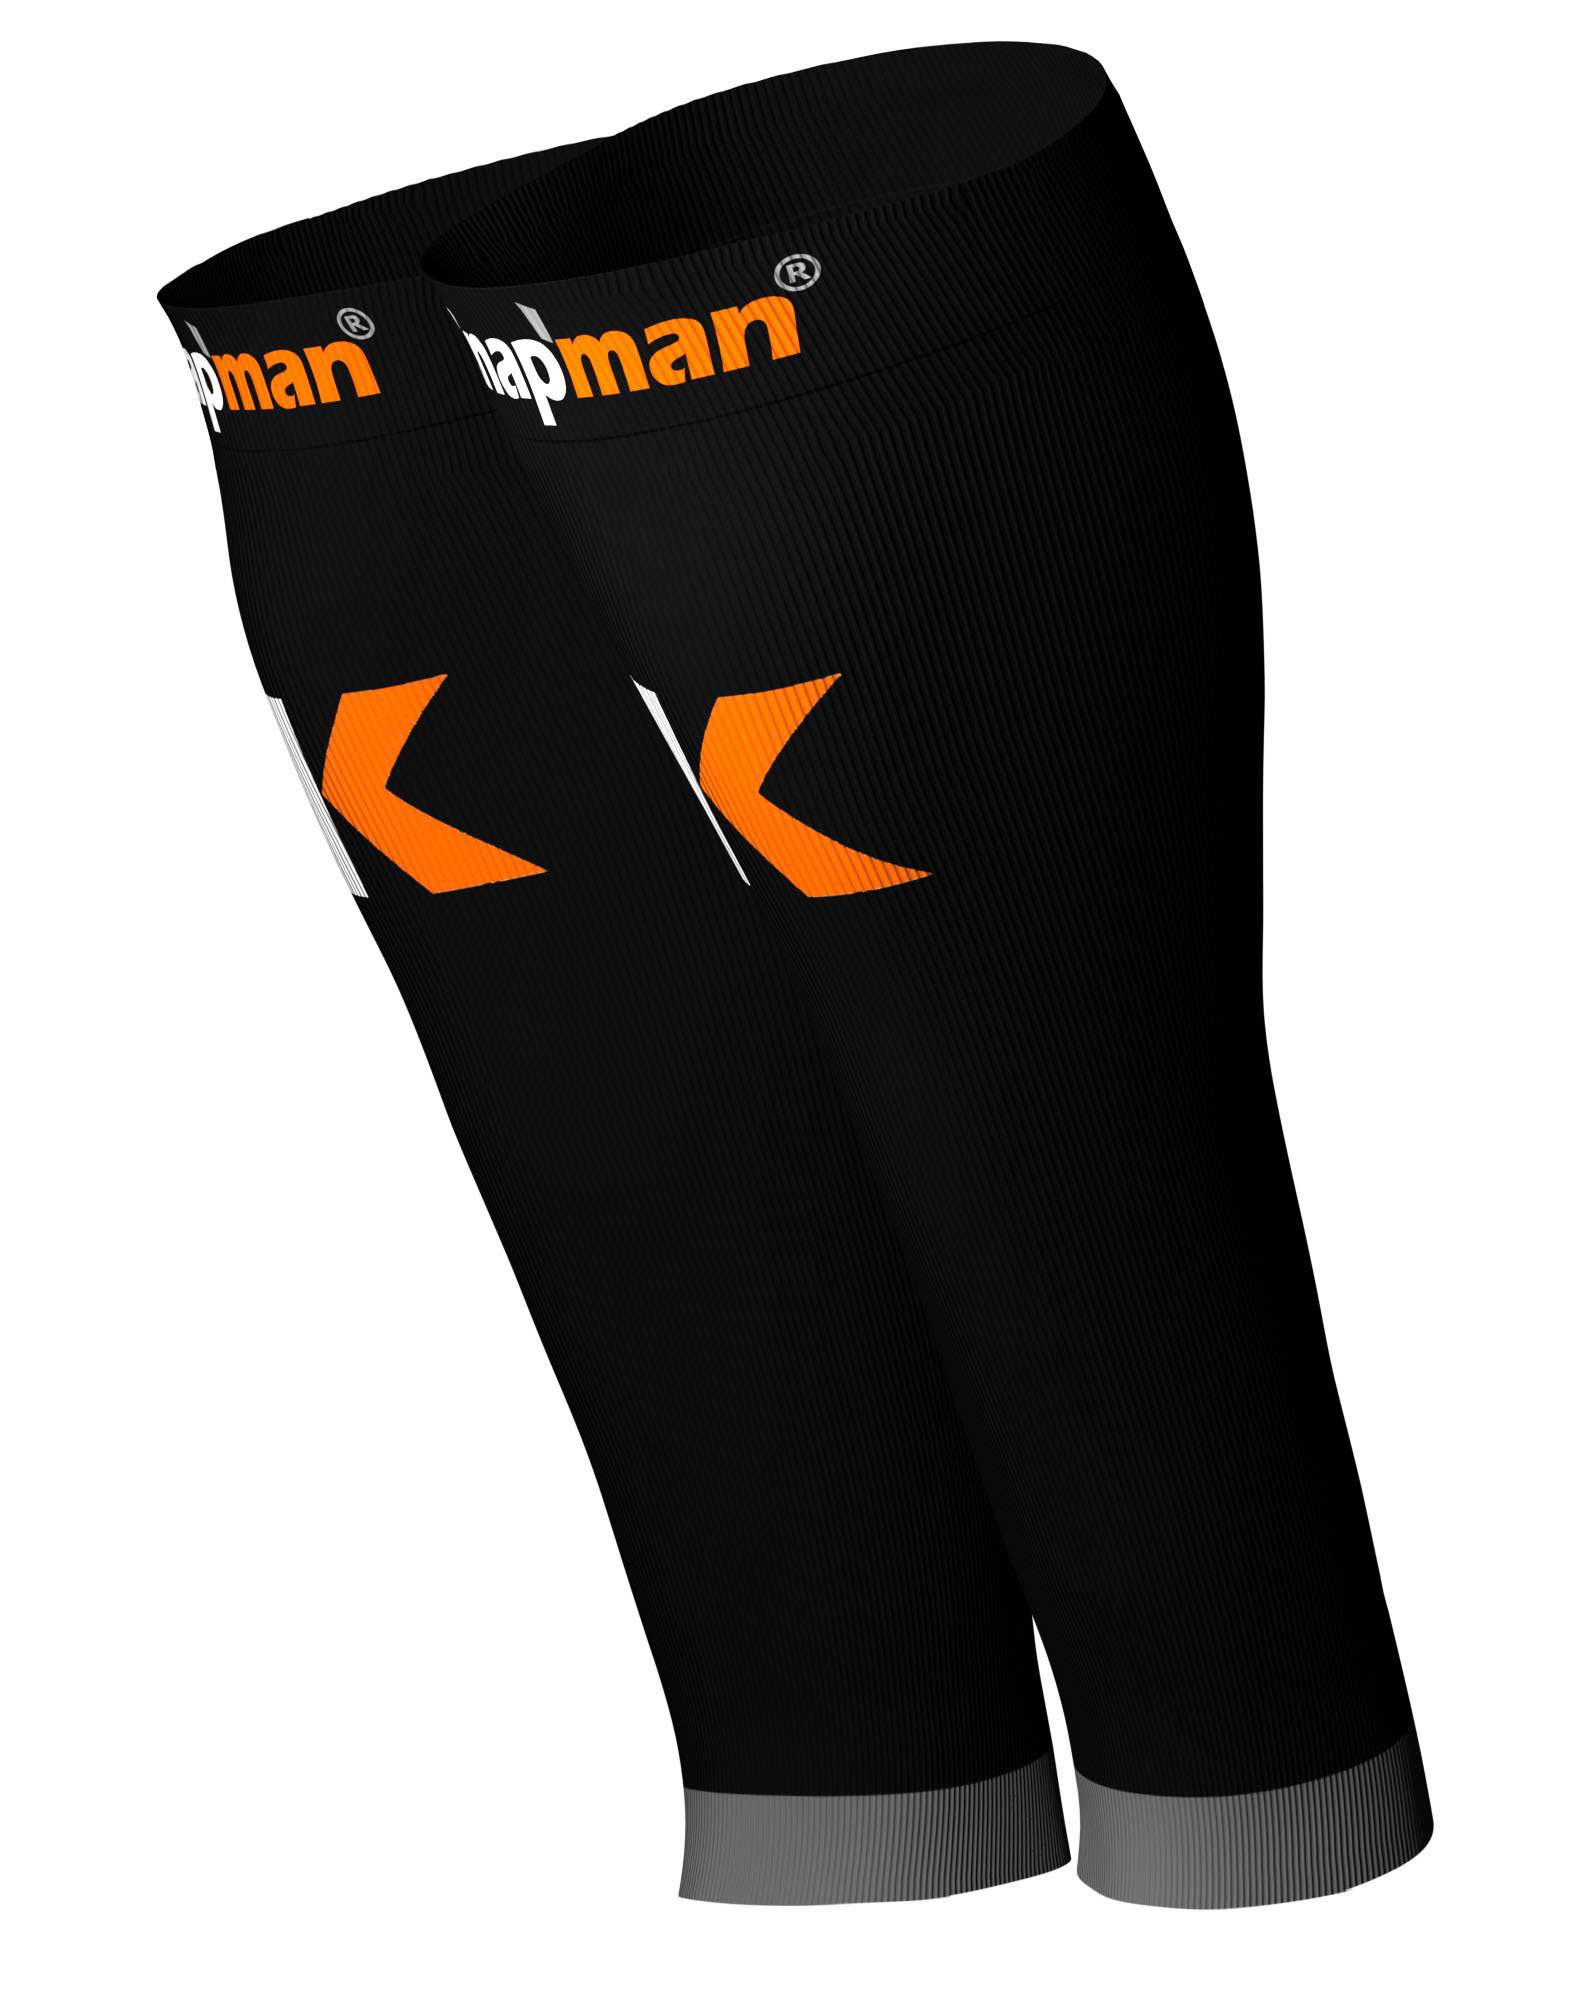 InstantFigure Compression Support for Men and Women Calf Sleeves